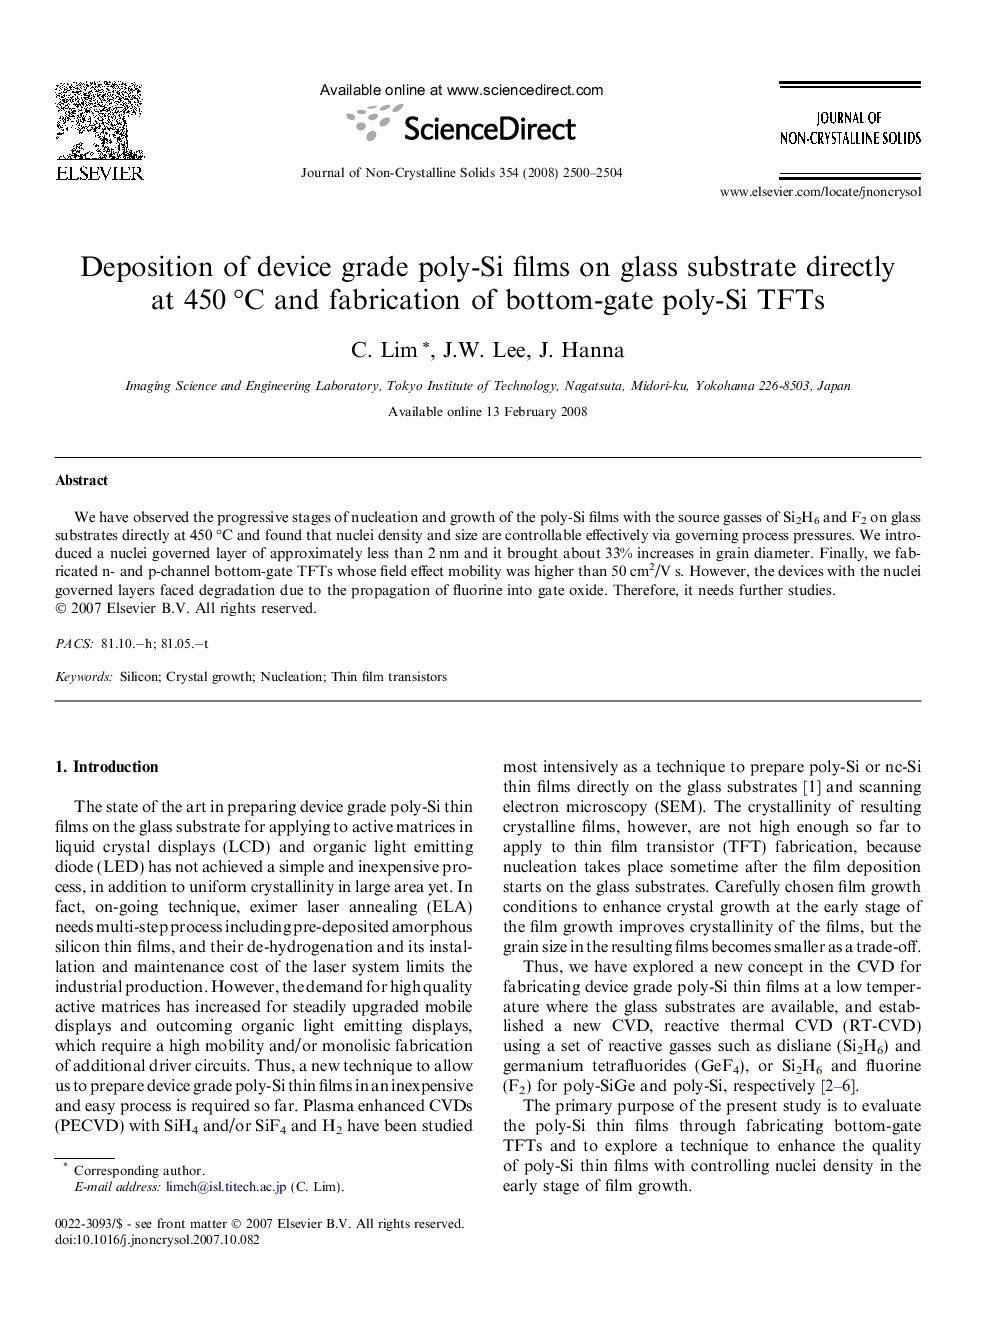 Deposition of device grade poly-Si films on glass substrate directly at 450 °C and fabrication of bottom-gate poly-Si TFTs